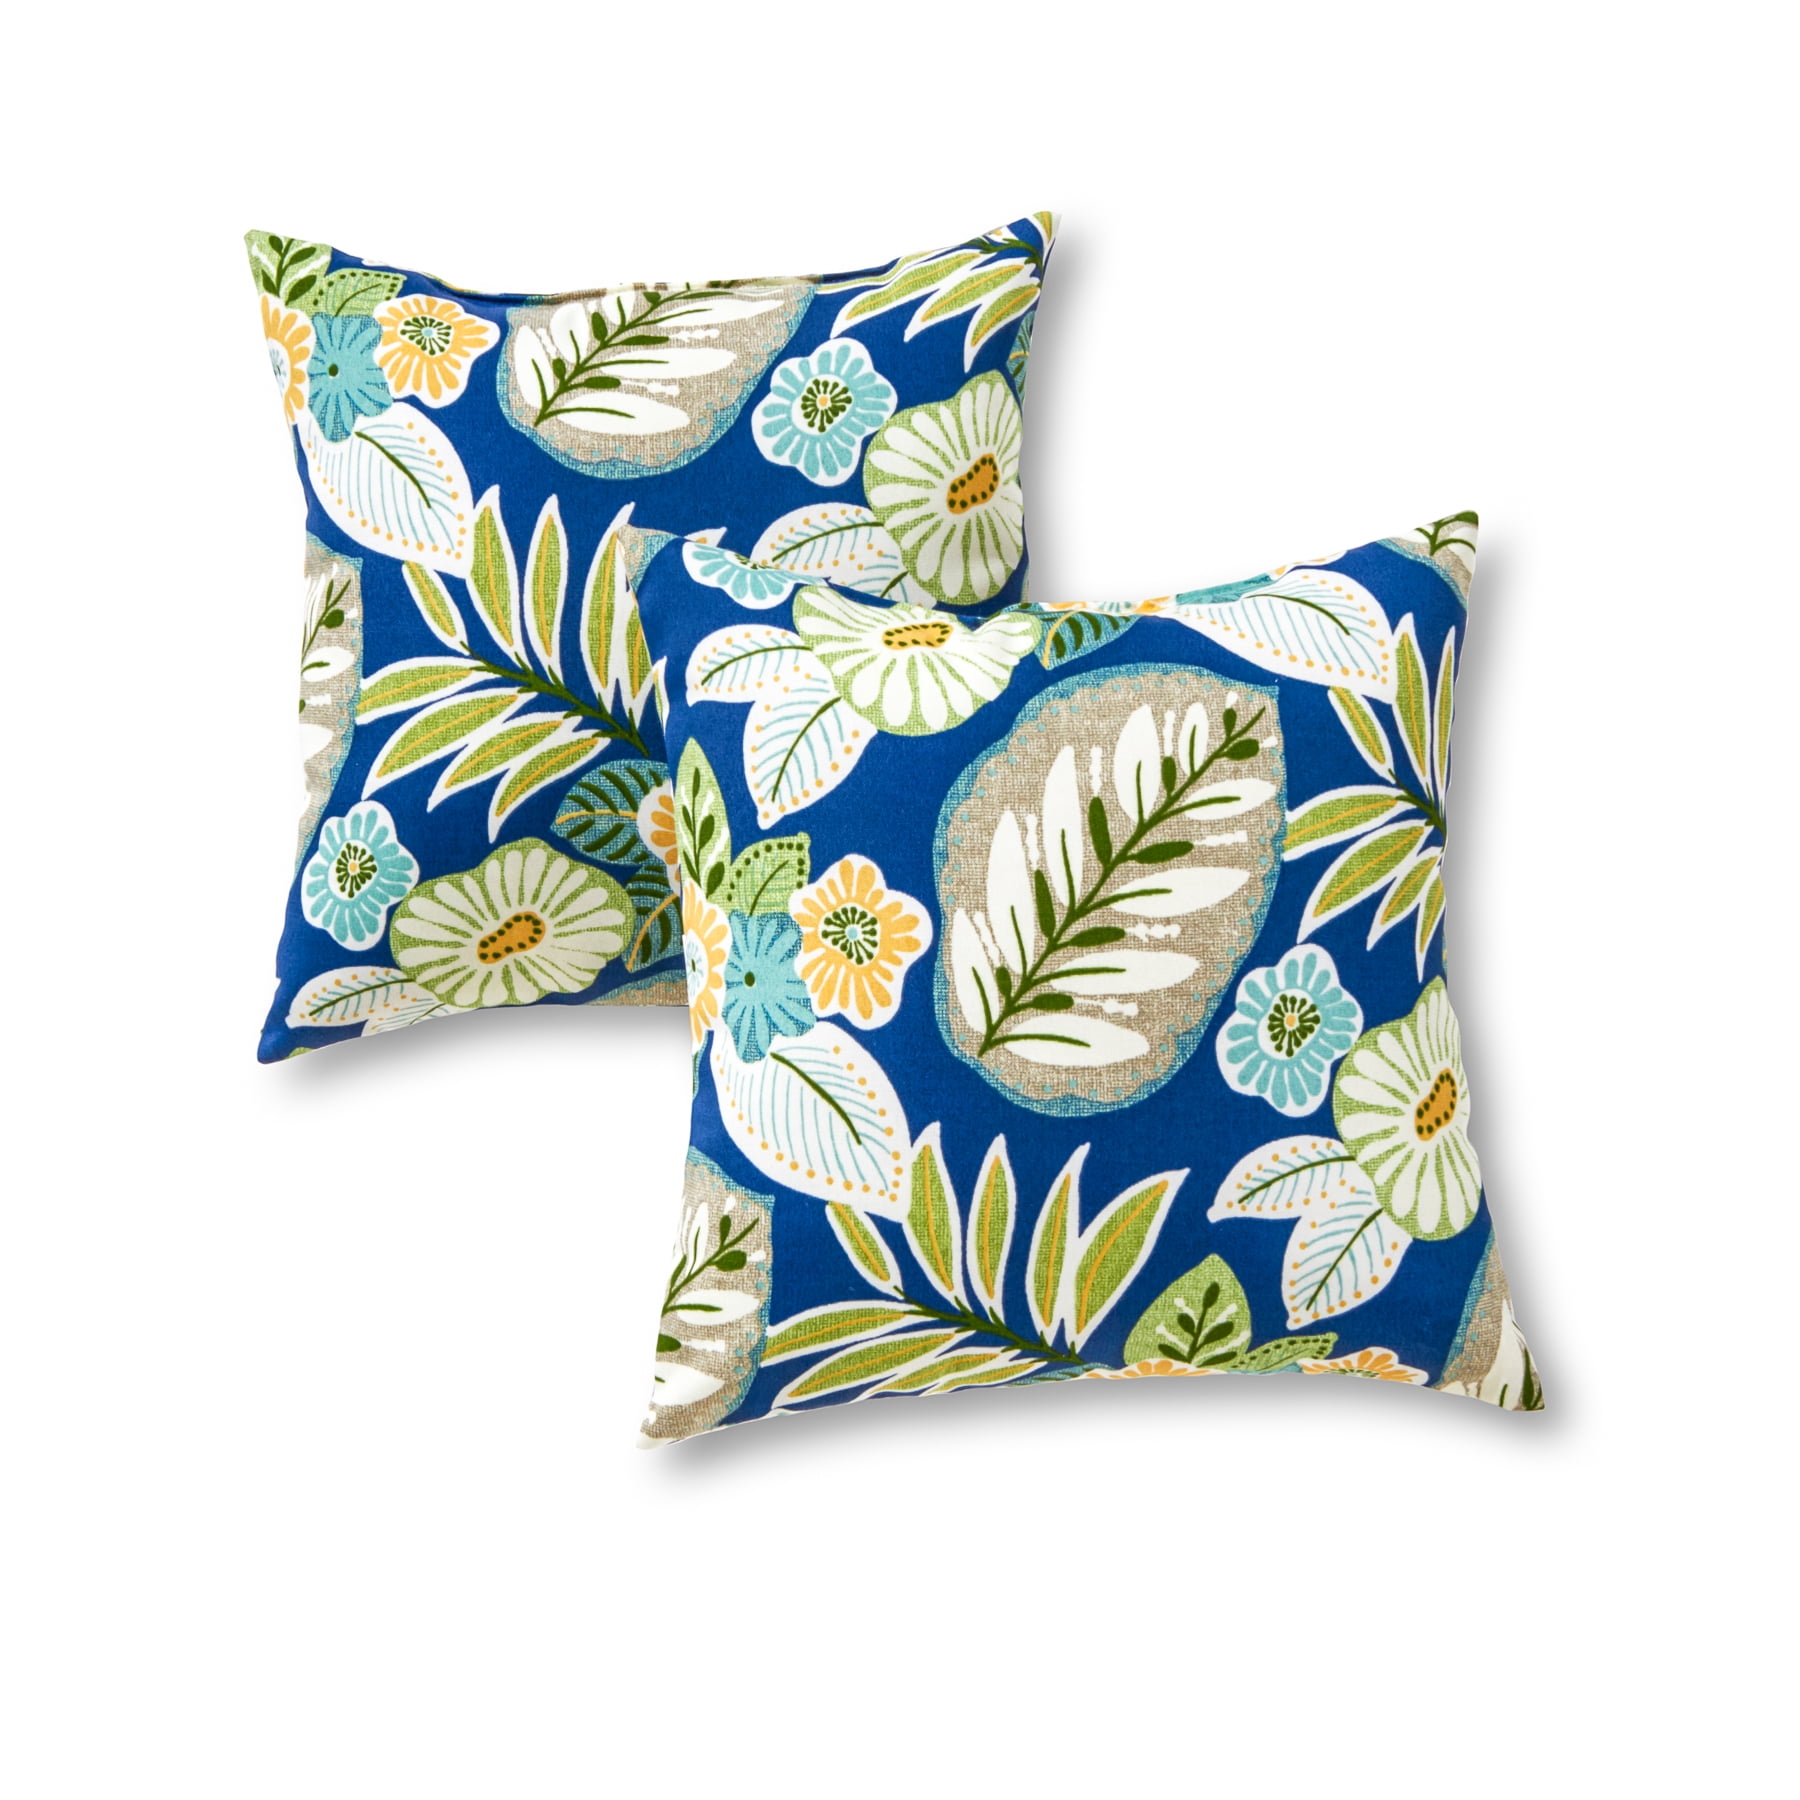 Pier 1 Cottage Coastal Throw Pillow 17 x 17 Embroidery Blue Back Yellow  Floral